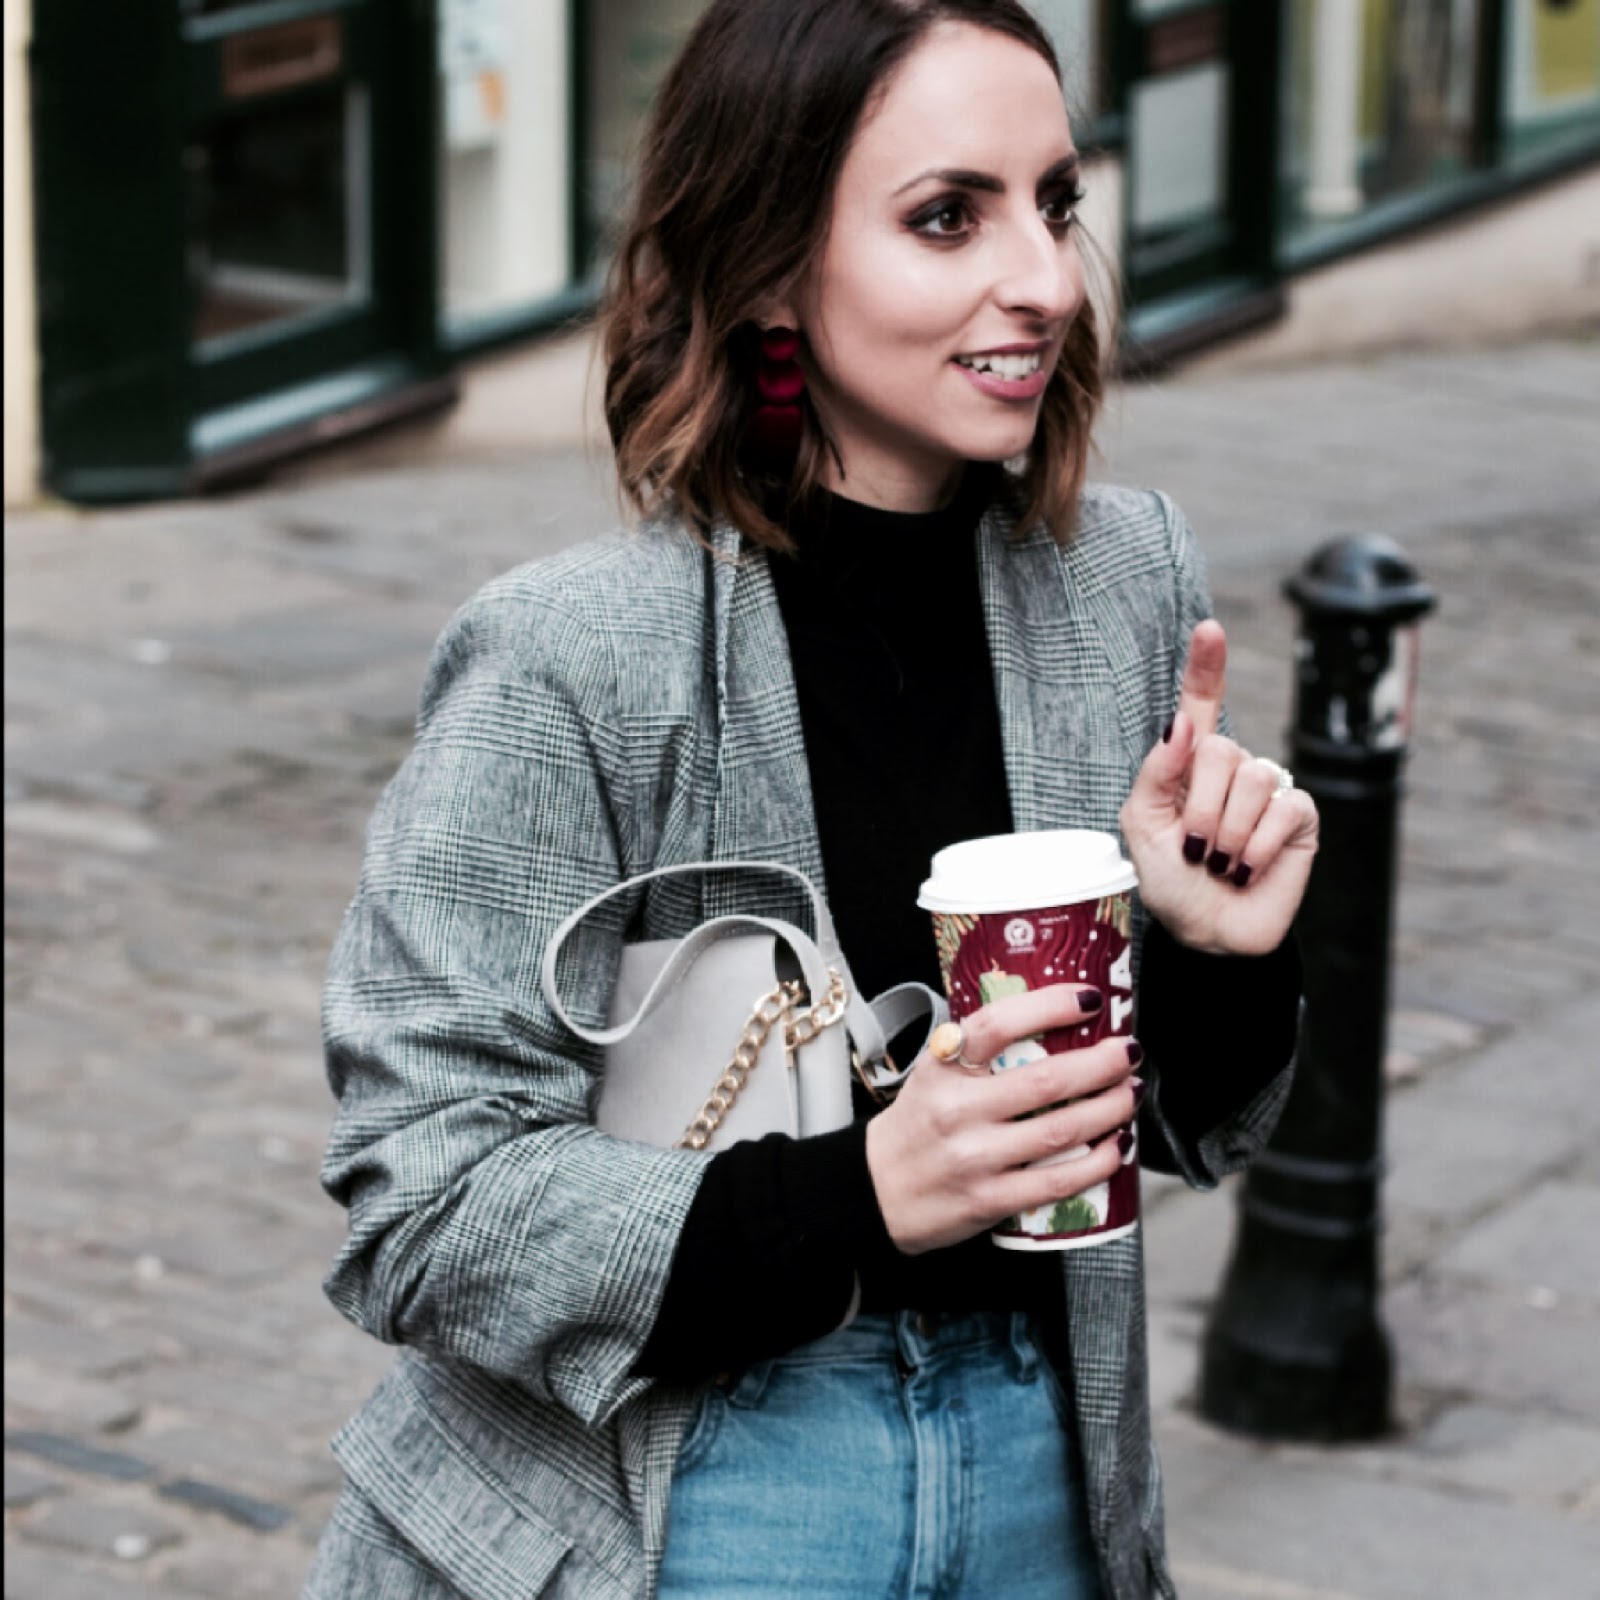 mental health, how to be happier, grow in confidence, help your self esteem, fashion, affordable fashion, ebay fashion, designer dupe, primark jacket, asos must haves, h&m haul, velvet shoes, zara earrings, ootd, street style,